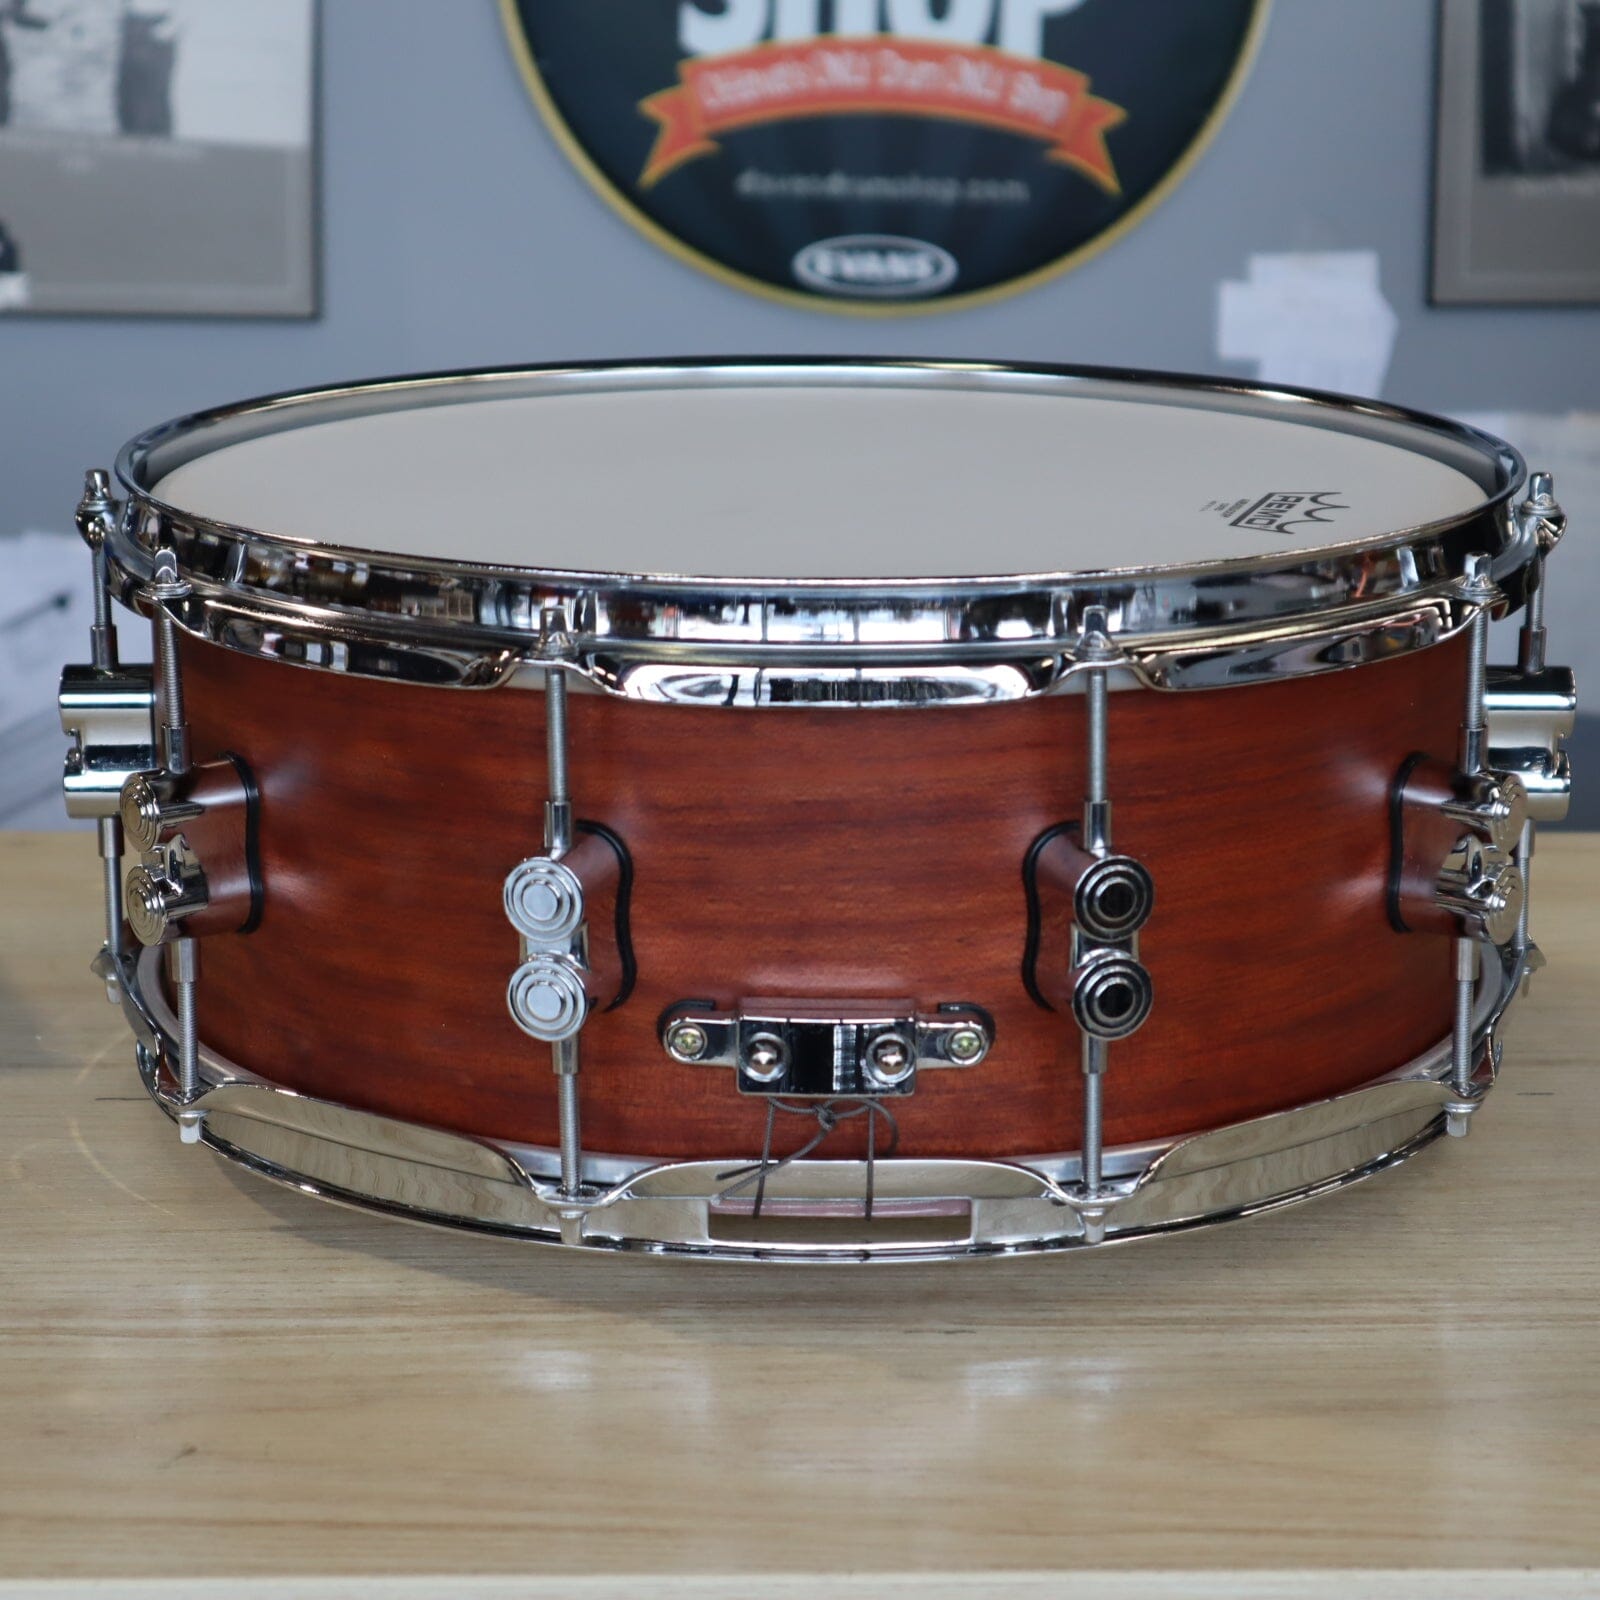 PDP LTD Edition 18Ply Bubinga/Maple Snare USED SNARE DRUMS PDP 